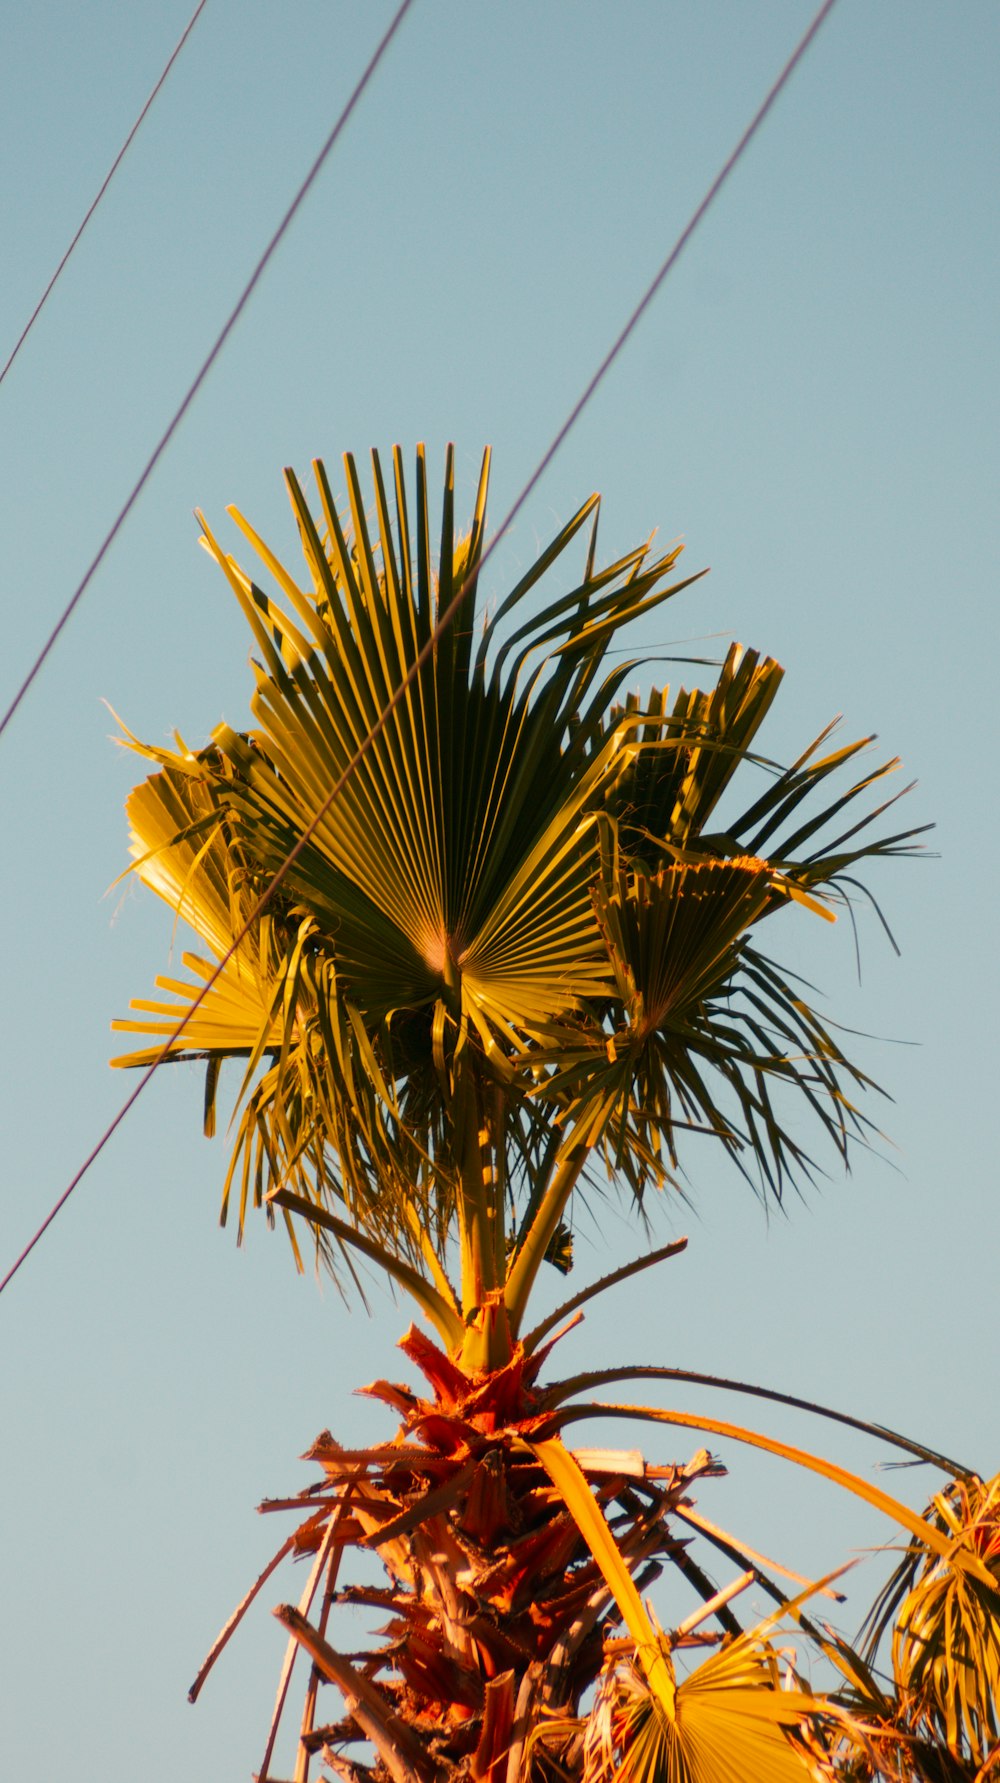 a close up of a palm tree with power lines in the background